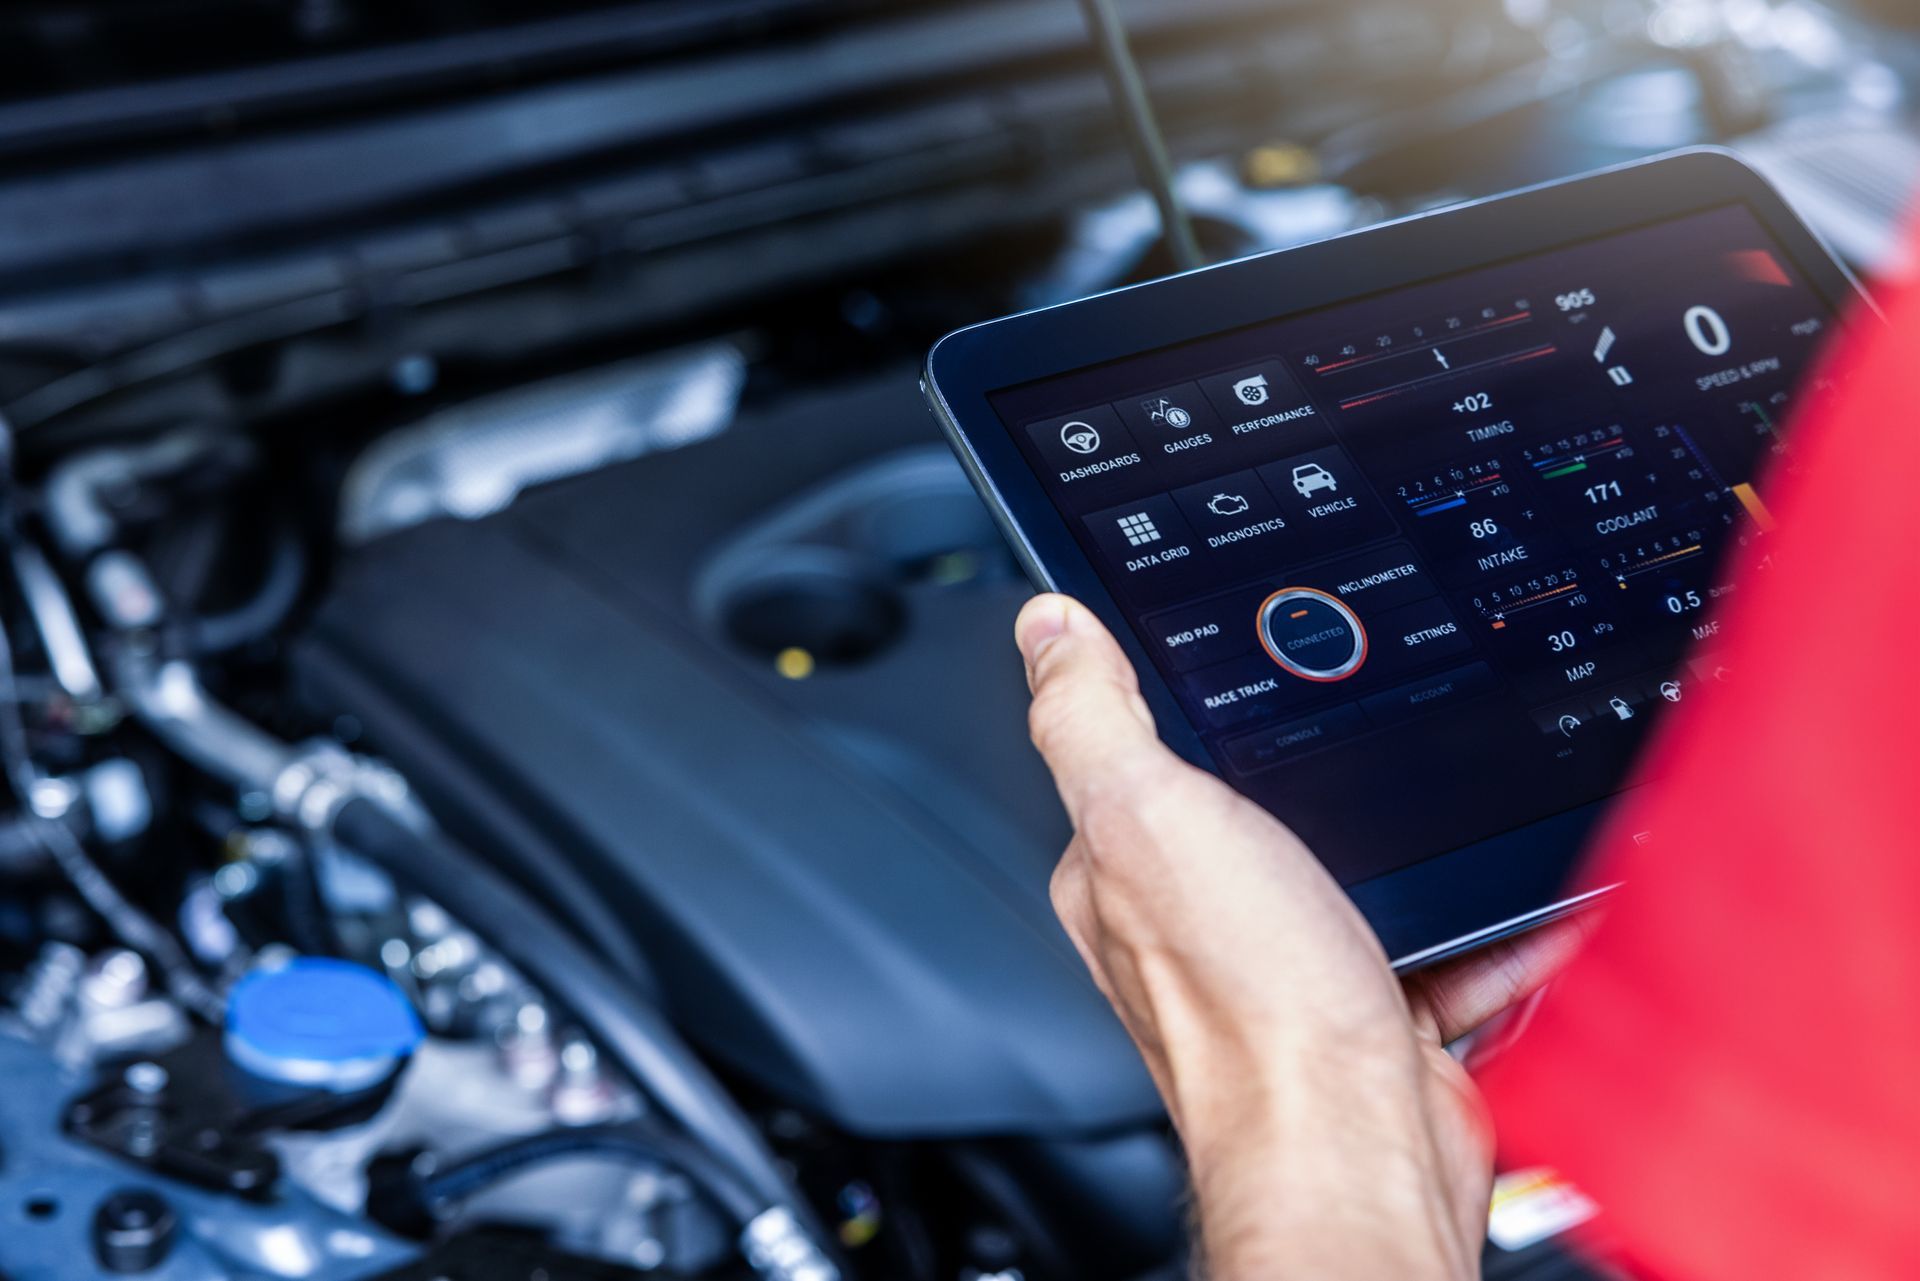 Digital Inspections at ﻿Ryan's Auto Care﻿ in ﻿Lake Mills, WI﻿